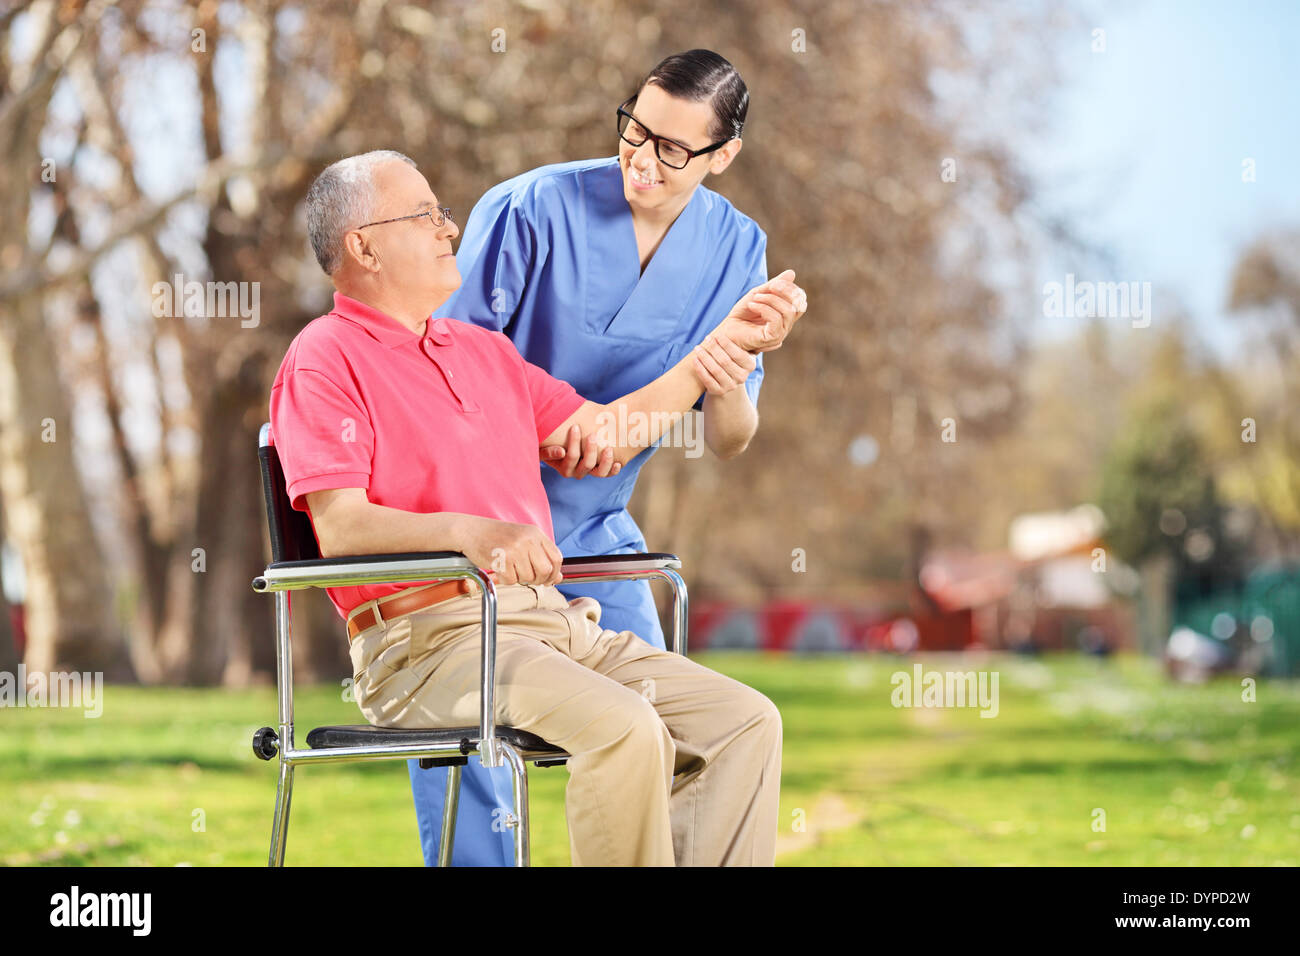 Male nurse checking the pulse of a senior in park Stock Photo